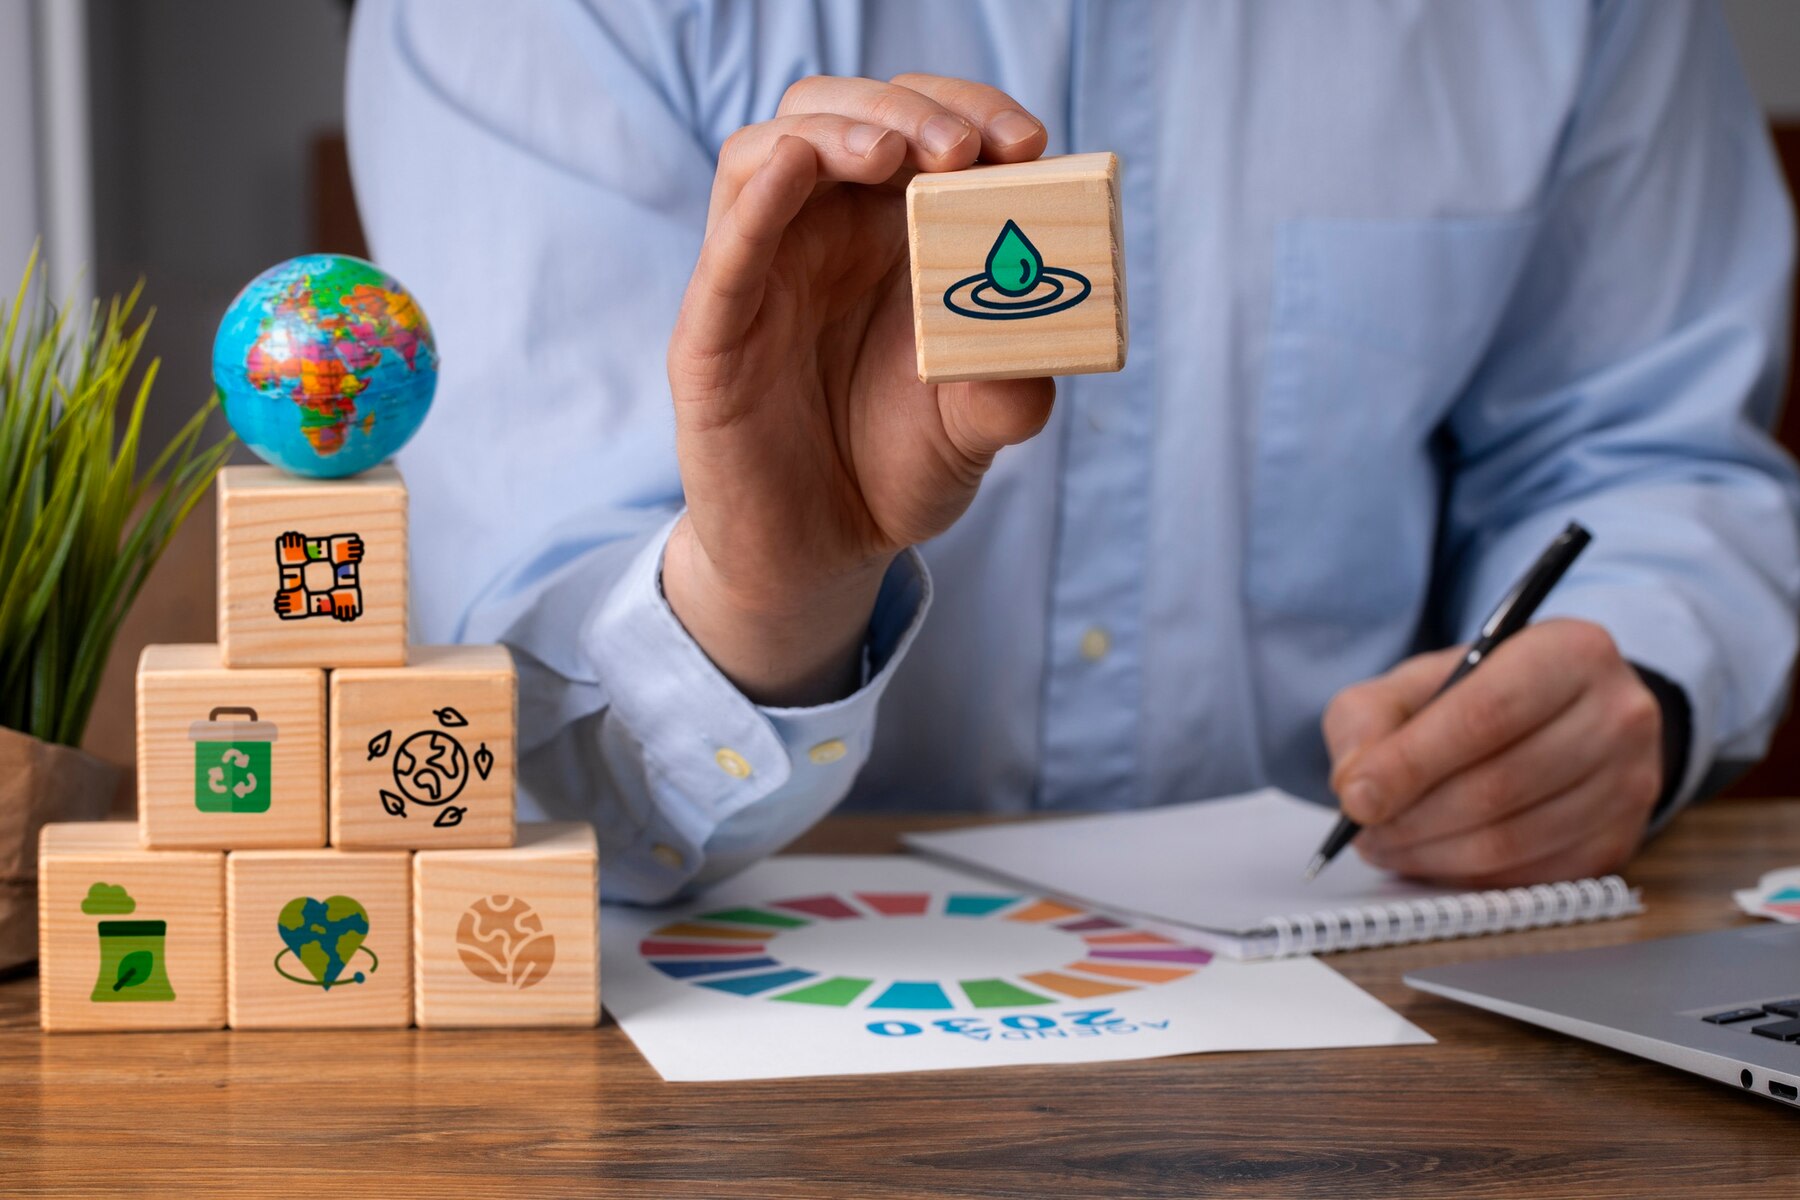 Image of businessman at desk holding wooden ESG cube, next to pyramid of similar cubes and a globe of the Earth